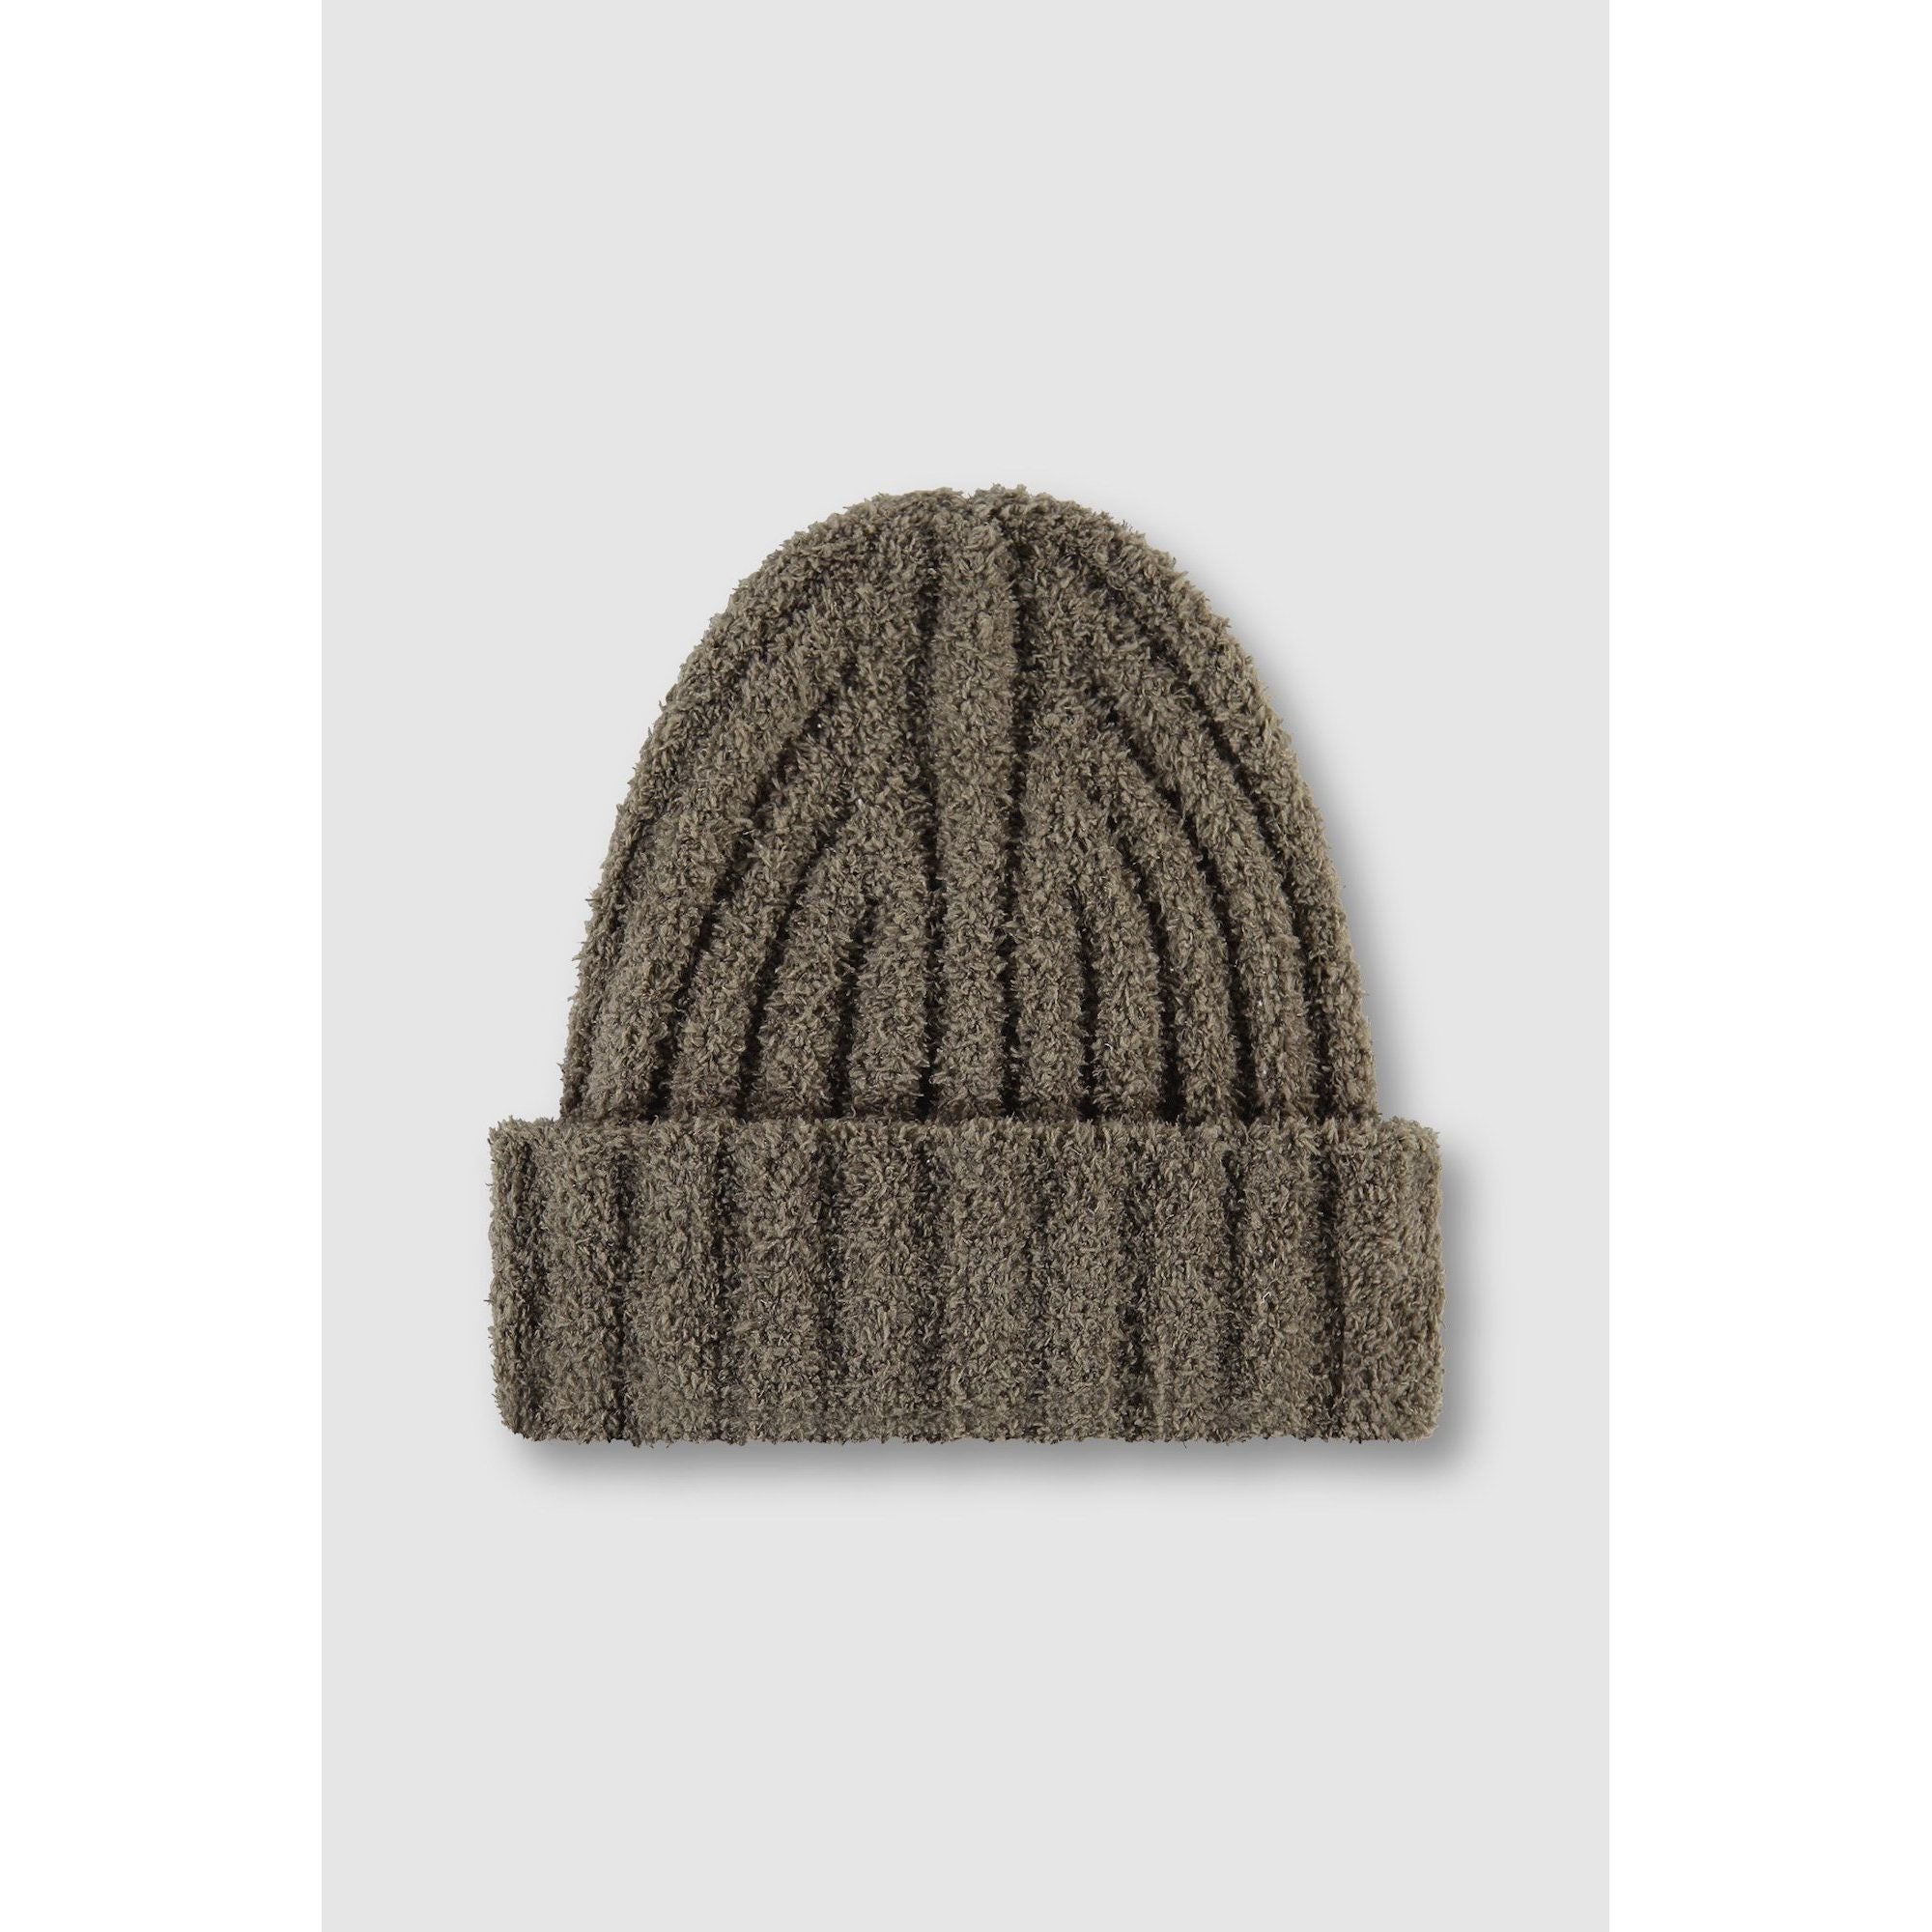 Rino & Pelle - Astra Beanie in Taupe